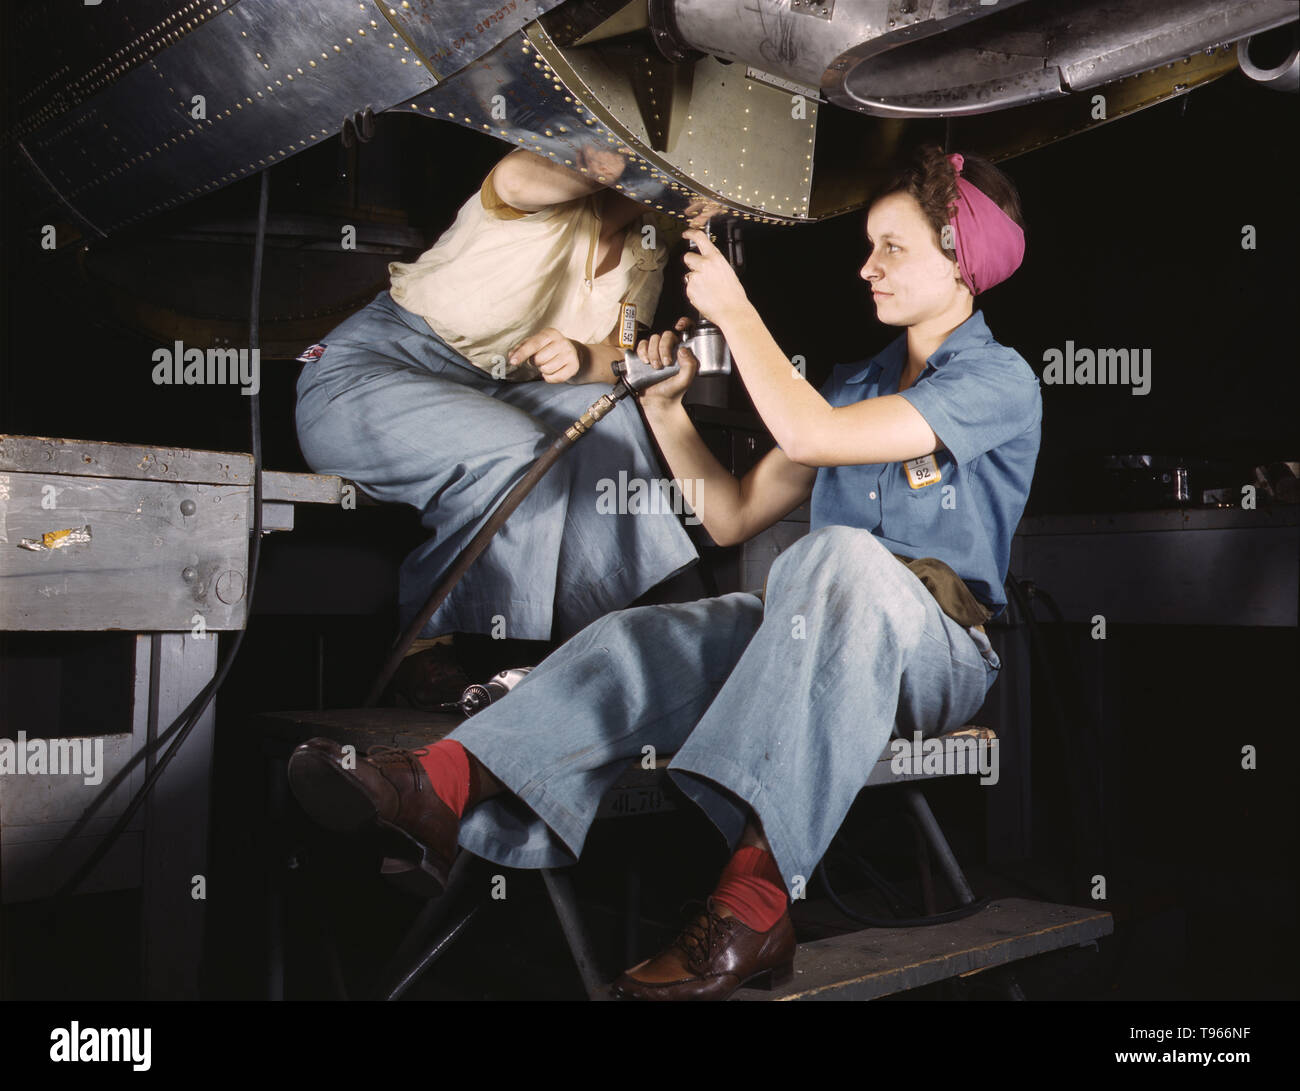 Women at work on bomber, Douglas Aircraft Company, Long Beach, California. Although the image of 'Rosie the Riveter' reflected the industrial work of welders and riveters, the majority of working women filled non-factory positions in every sector of the economy. What unified the experiences of these women was that they proved to themselves, and the country, that they could do a man's job and could do it well. Photographed by Alfred T. Palmer, 1942. Stock Photo